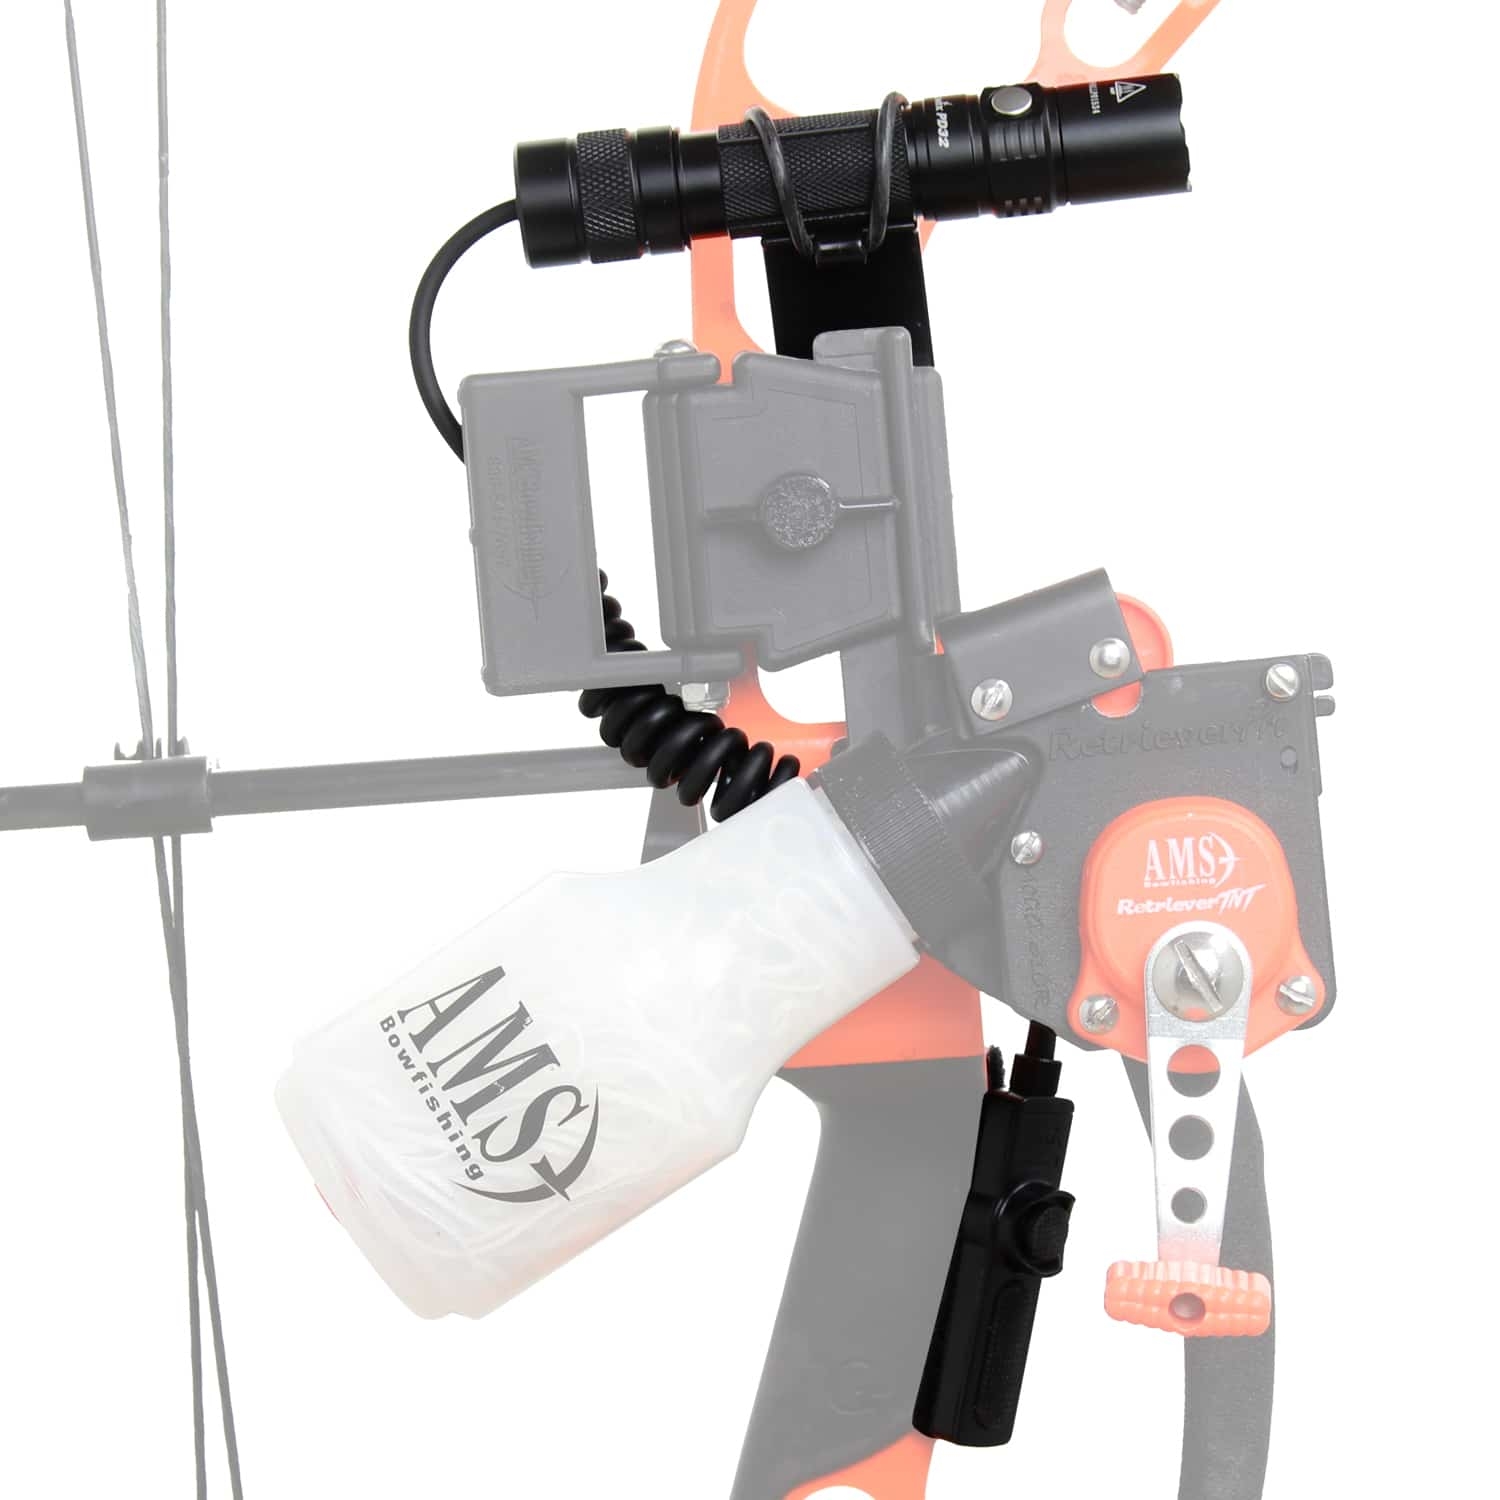 AMS Bowfishing Special Ops Night Vision Bow Light System.